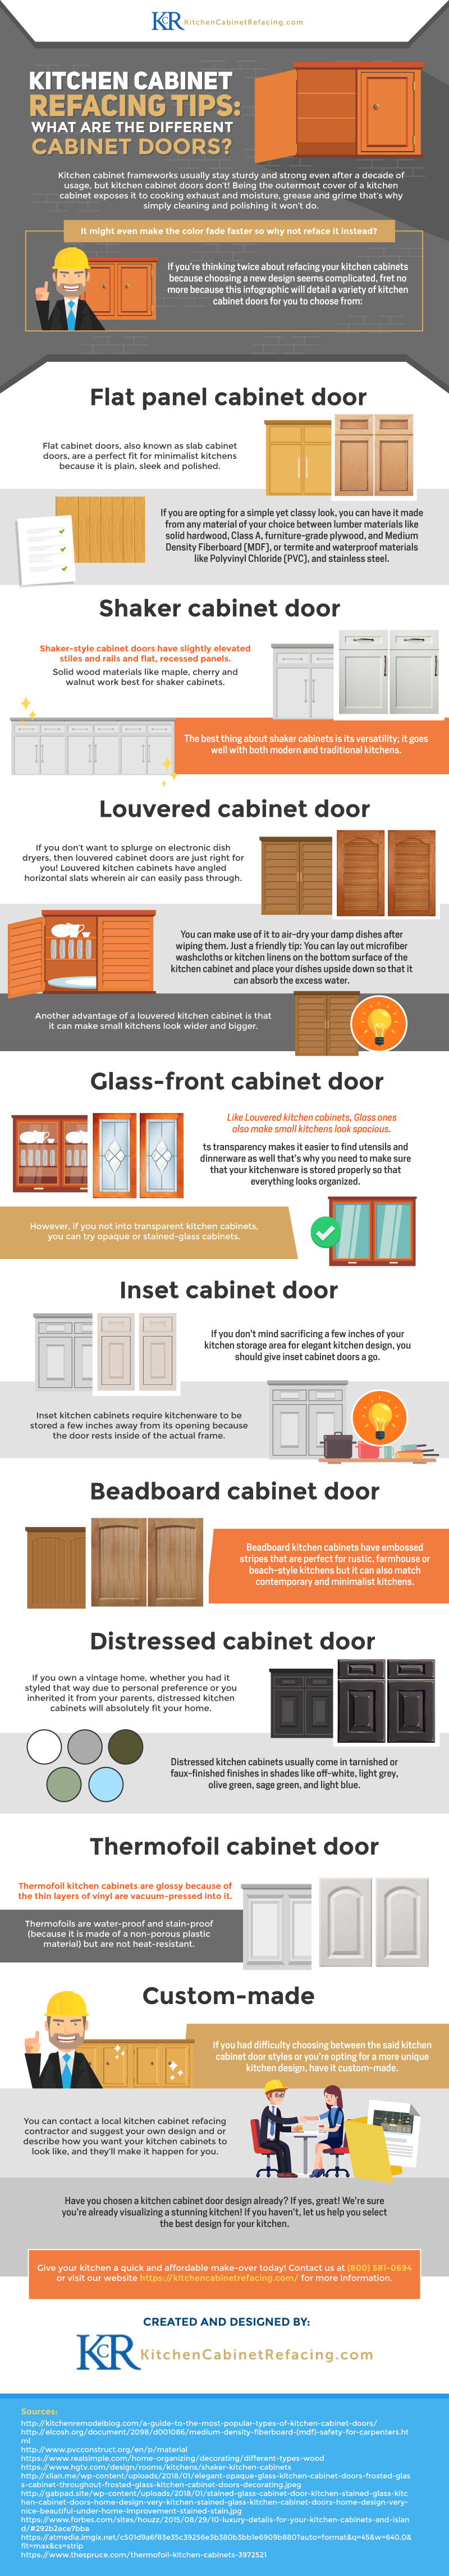 Kitchen Cabinet Refacing Tips What Are the Different Cabinet Doors